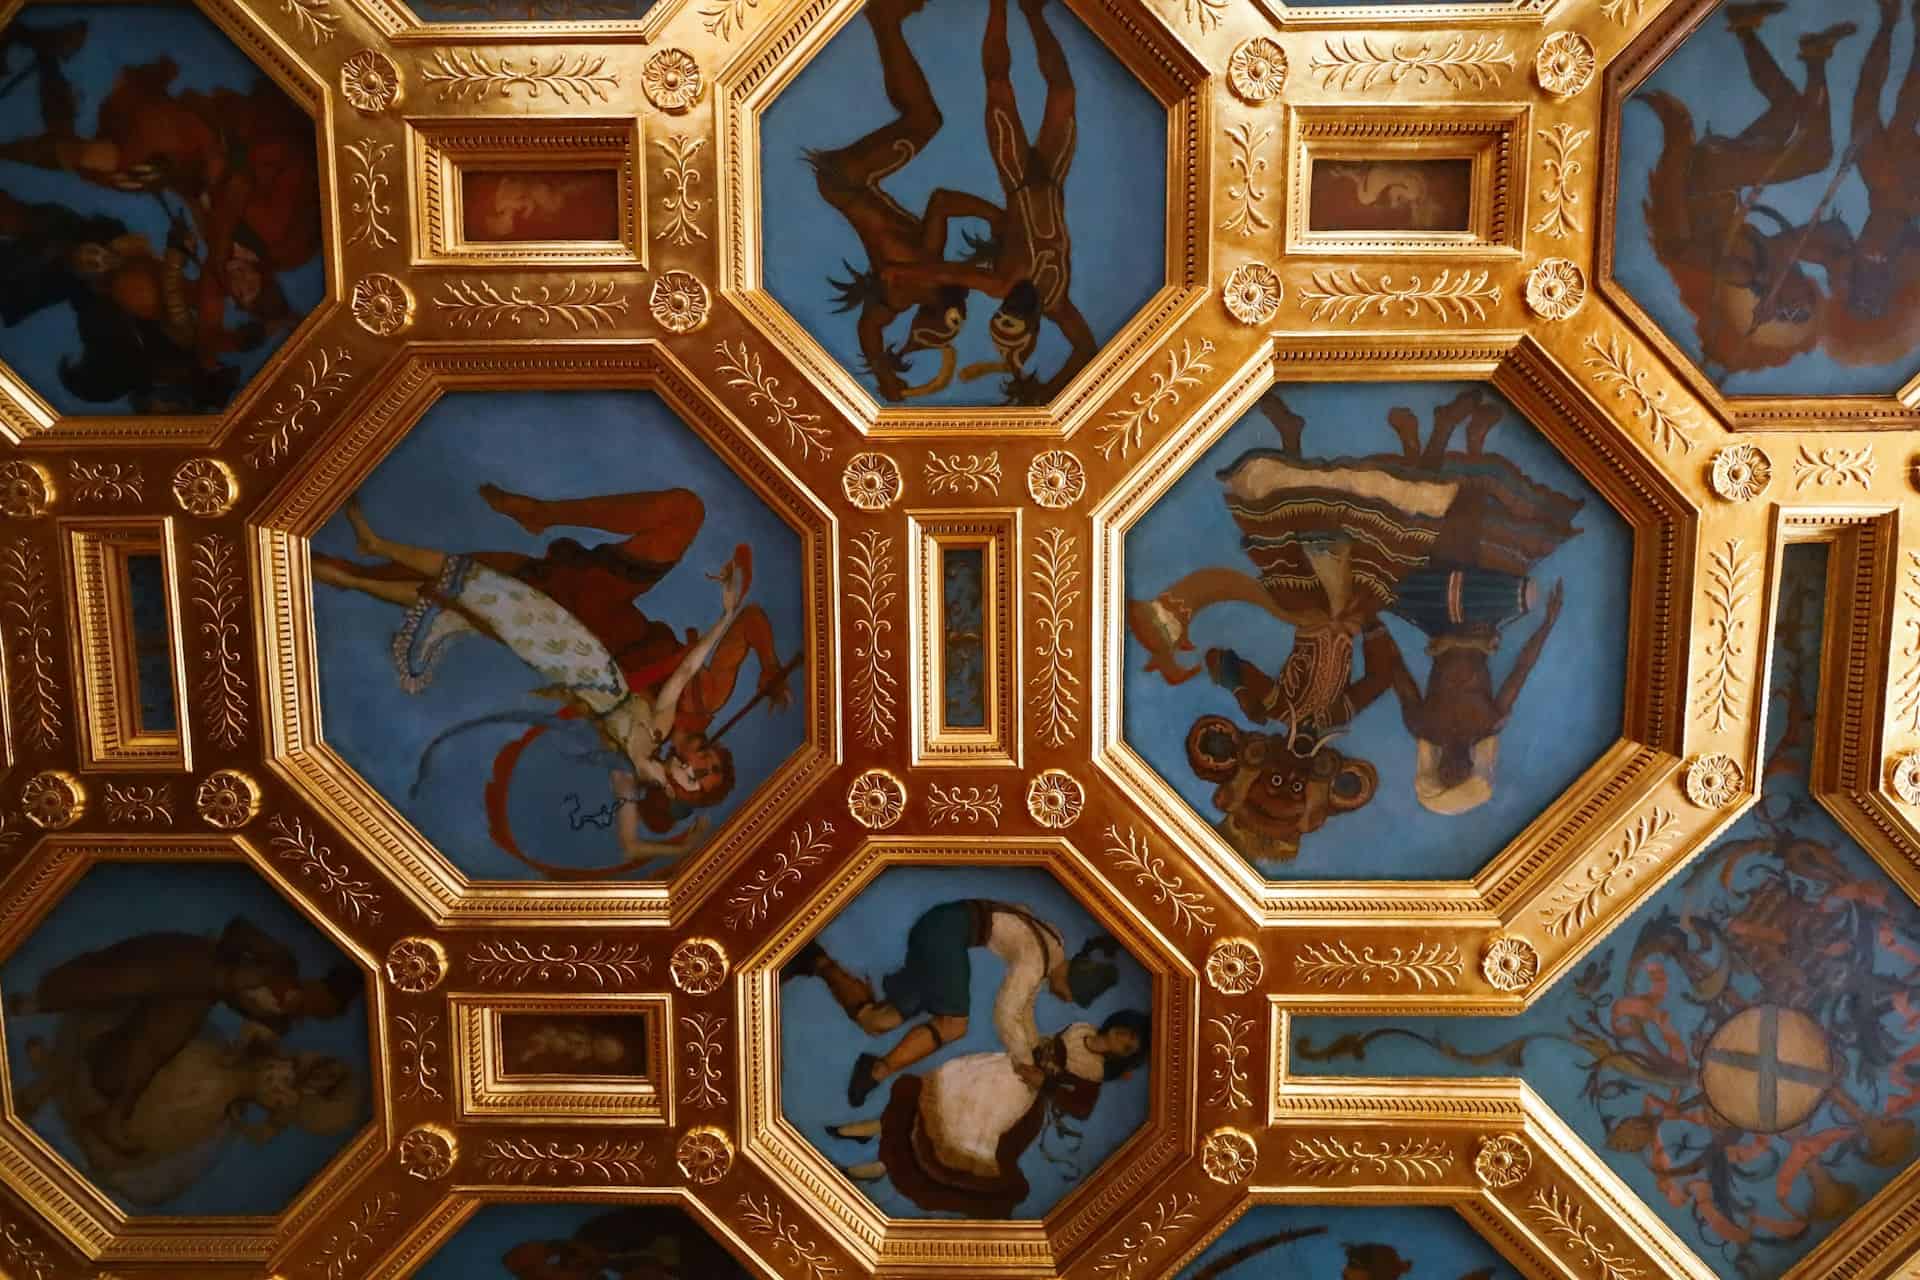 Best things to do in Sarasota Florida - Tracy McHugh - Decorated ceiling at Ca' d'Zan Mansion by Brandon Griggs on Unsplash